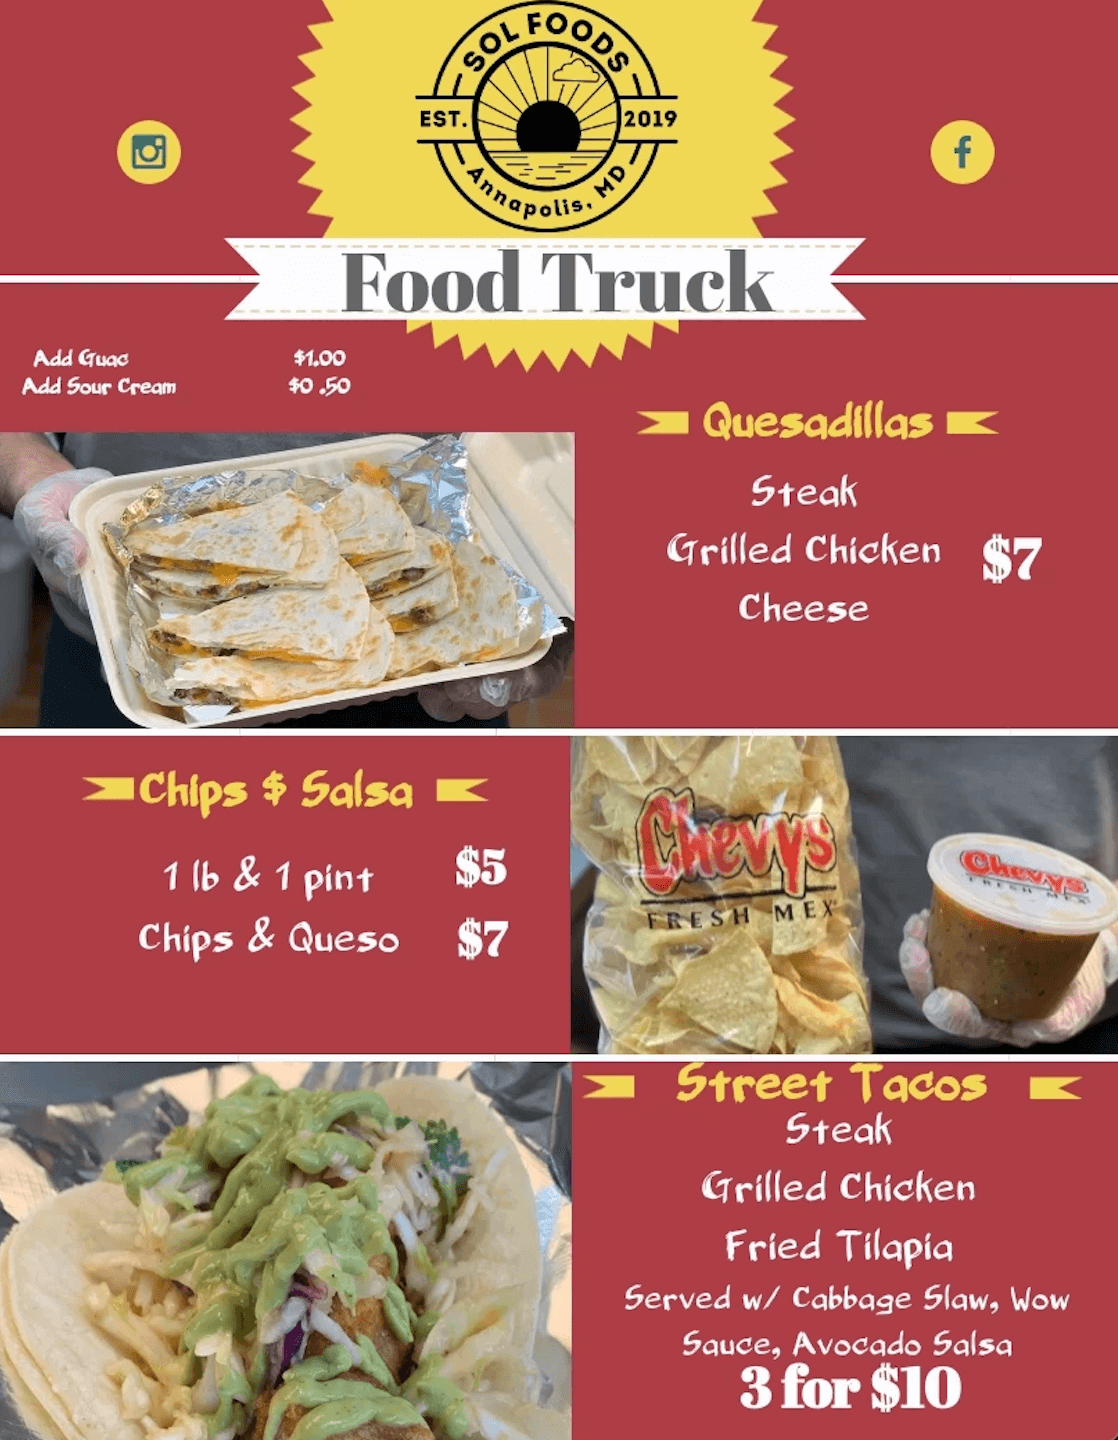 We Are Excited to Introduce Our New Food Truck - Chevys Sol Dos!